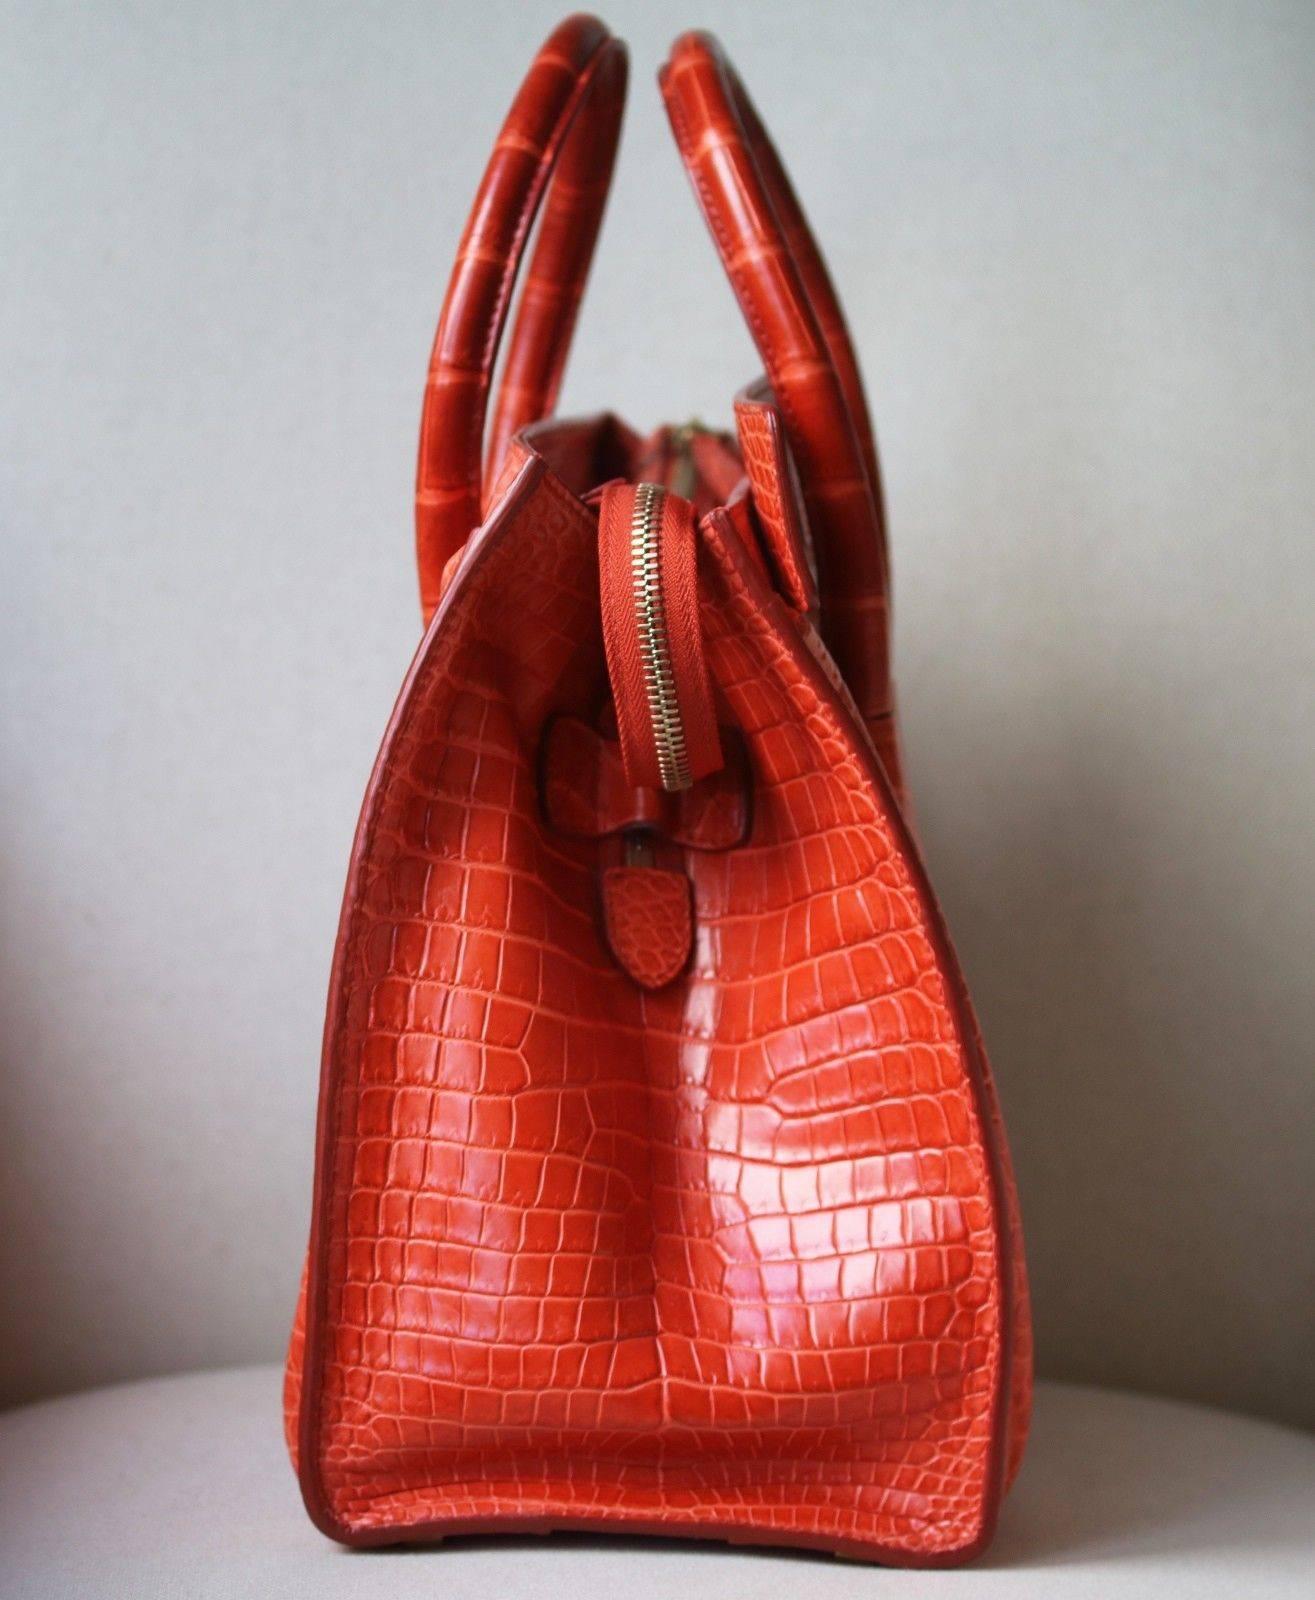 Celine Crocodile Handbag with Goldtone Hardware in beautiful crocodile leather in the most beautiful rich orange colour with tonal orange stitching. 
 
Condition - Leather is still stiff and untarnished. Has full feeling of a new bag. Excellent